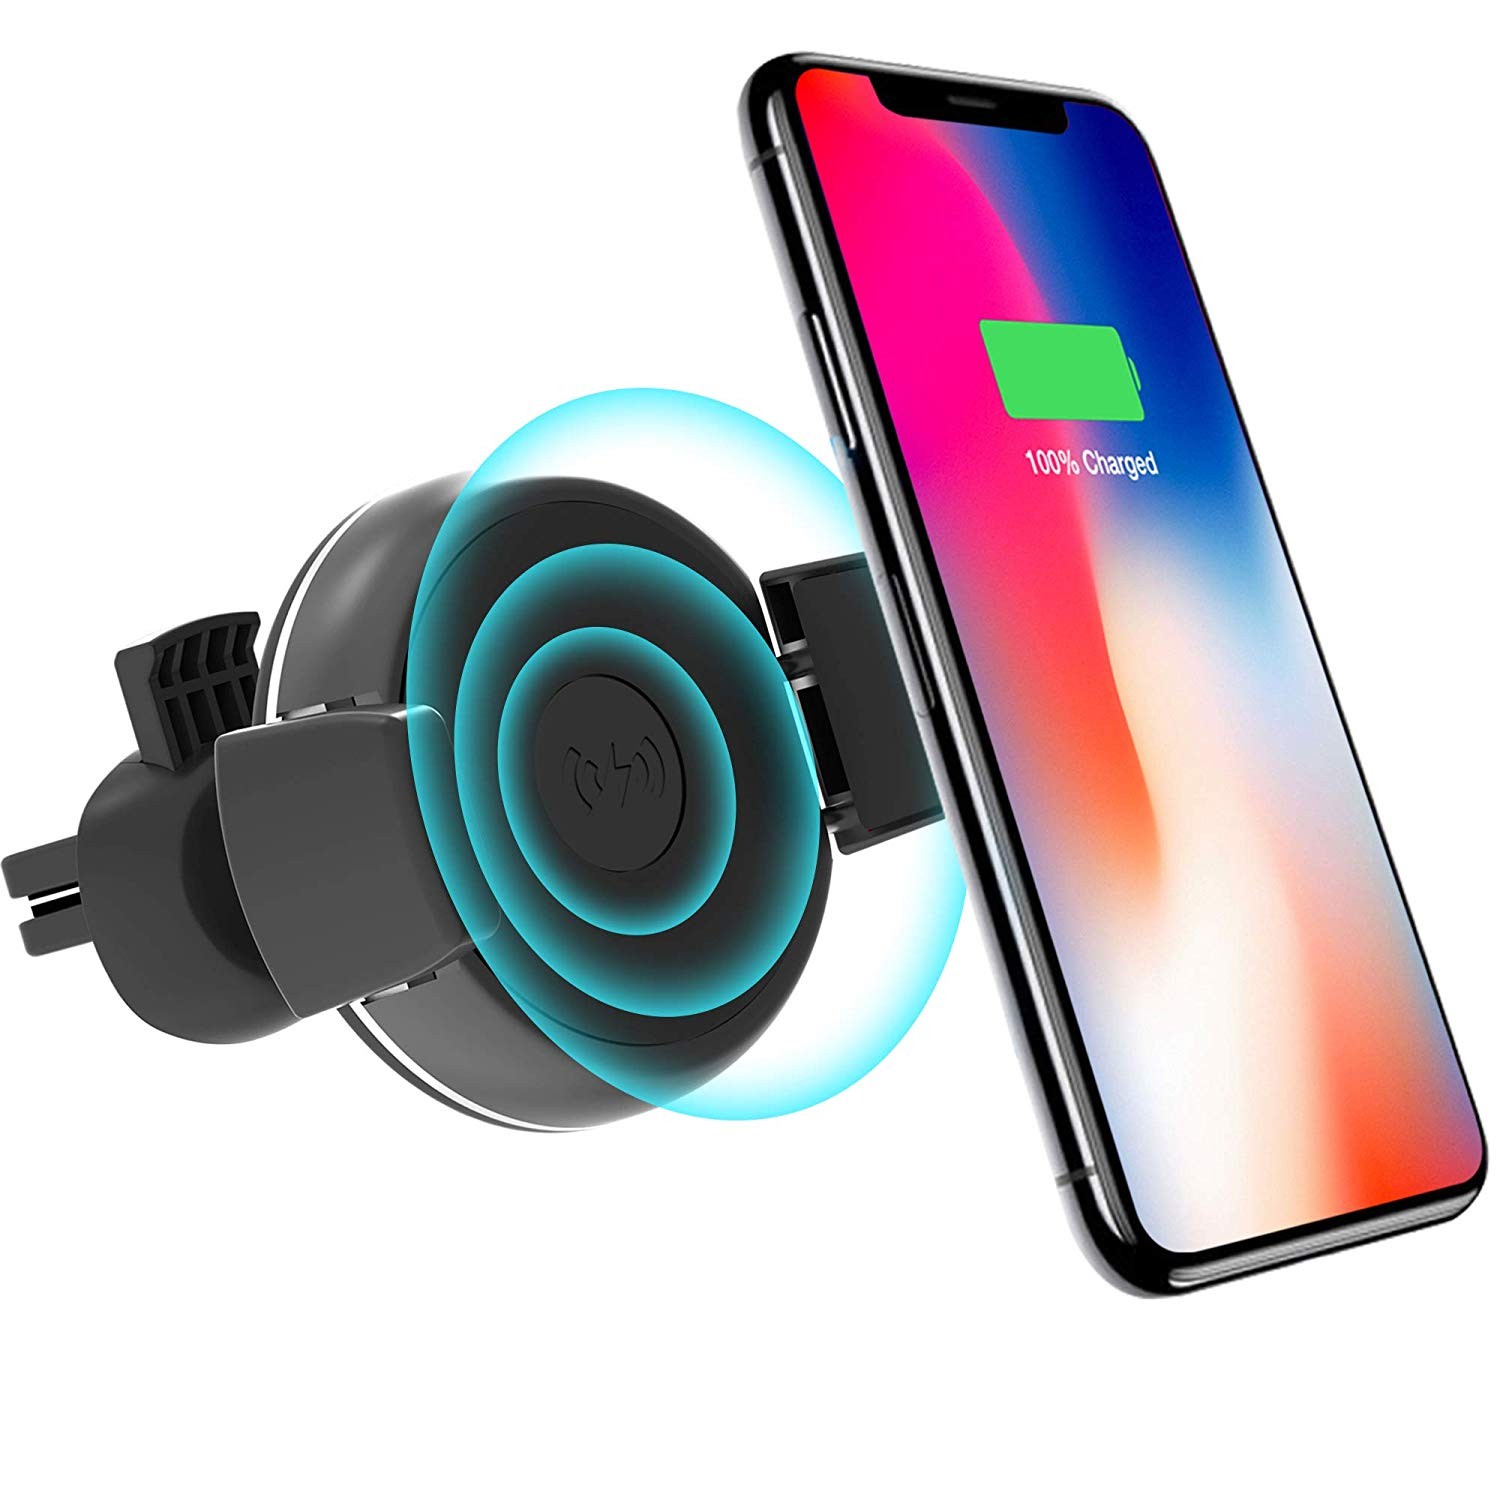 DK Tech Wireless Car Charger Car Wireless Charger for Apple iPhone X 8 8 Plus Samsung Galaxy Note 8 S8 S8 S7 S6 Edge Note 5 and All QI Enabled Devices